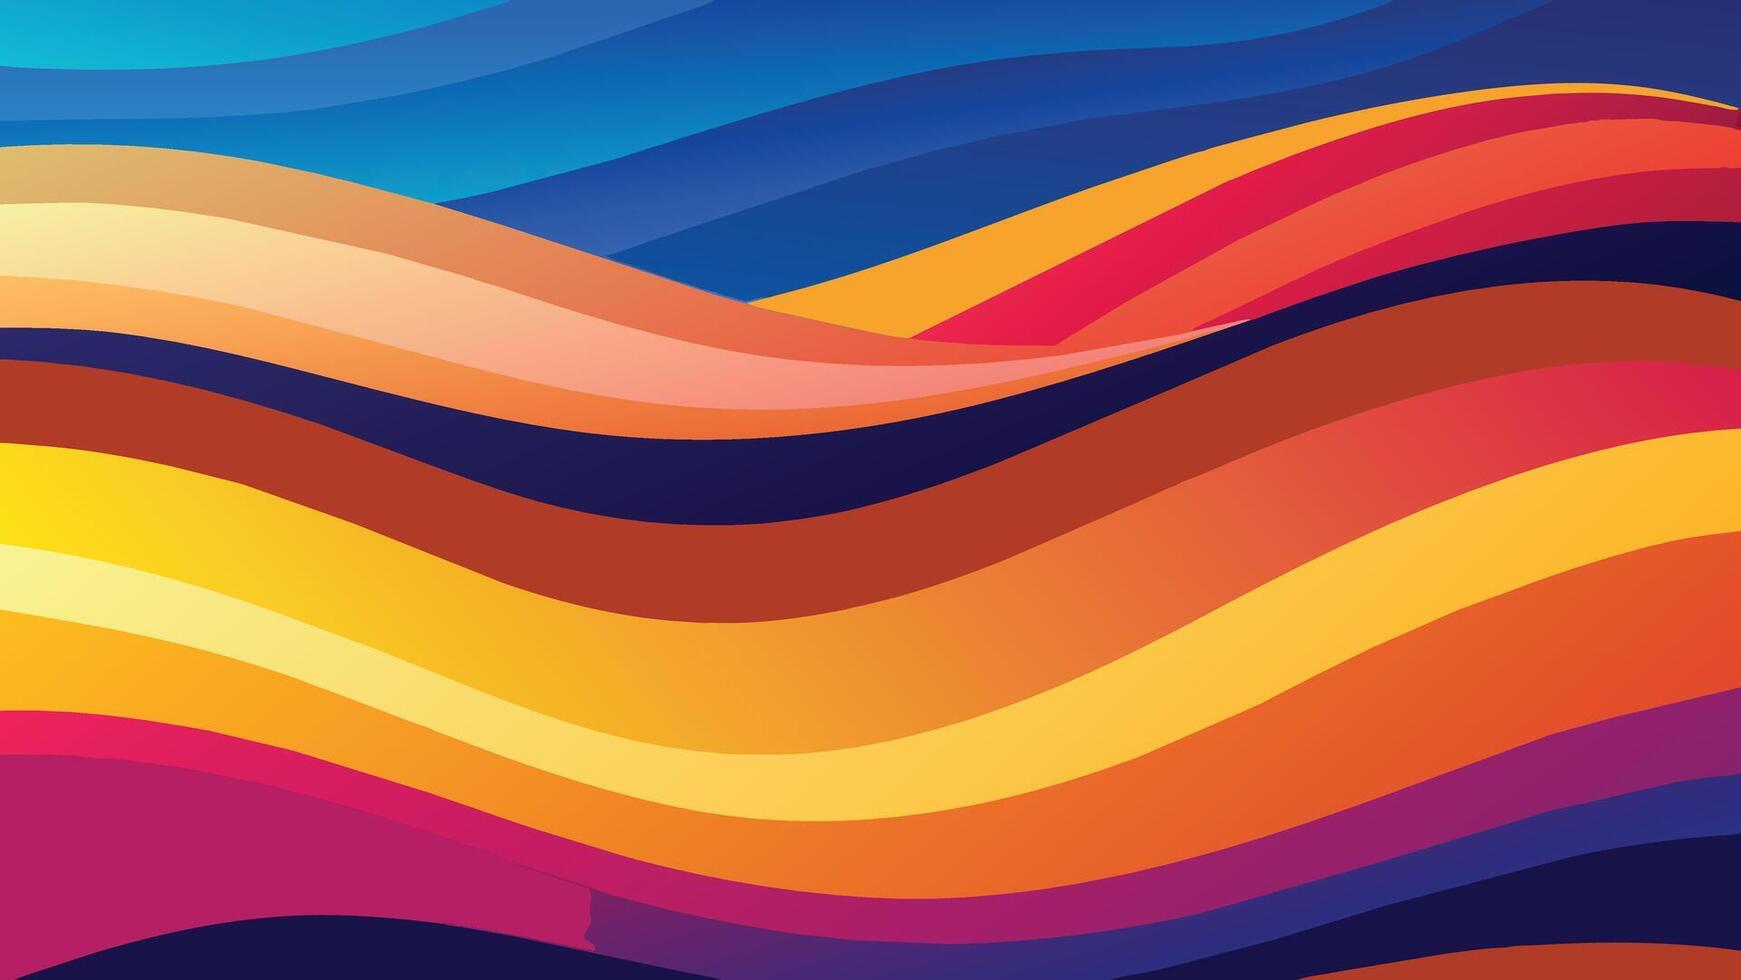 abstract colorful background with wavy lines and waves, vector illustration